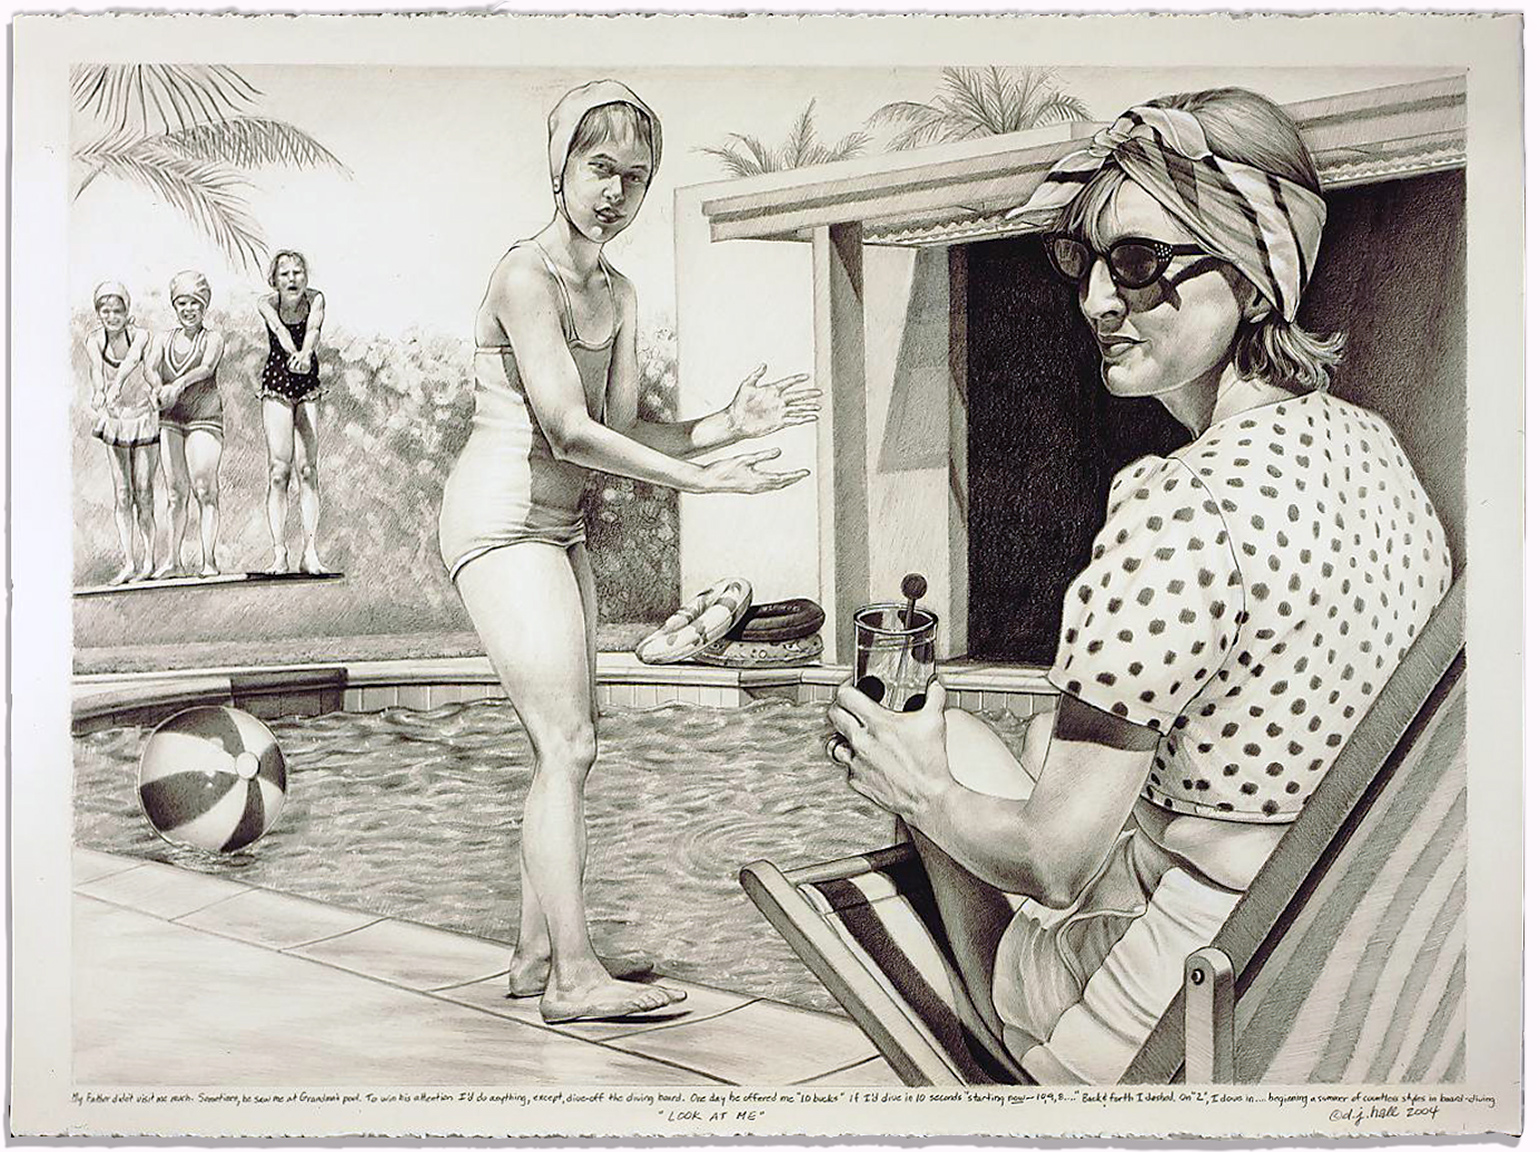 a realistic graphite drawing of a pool scene